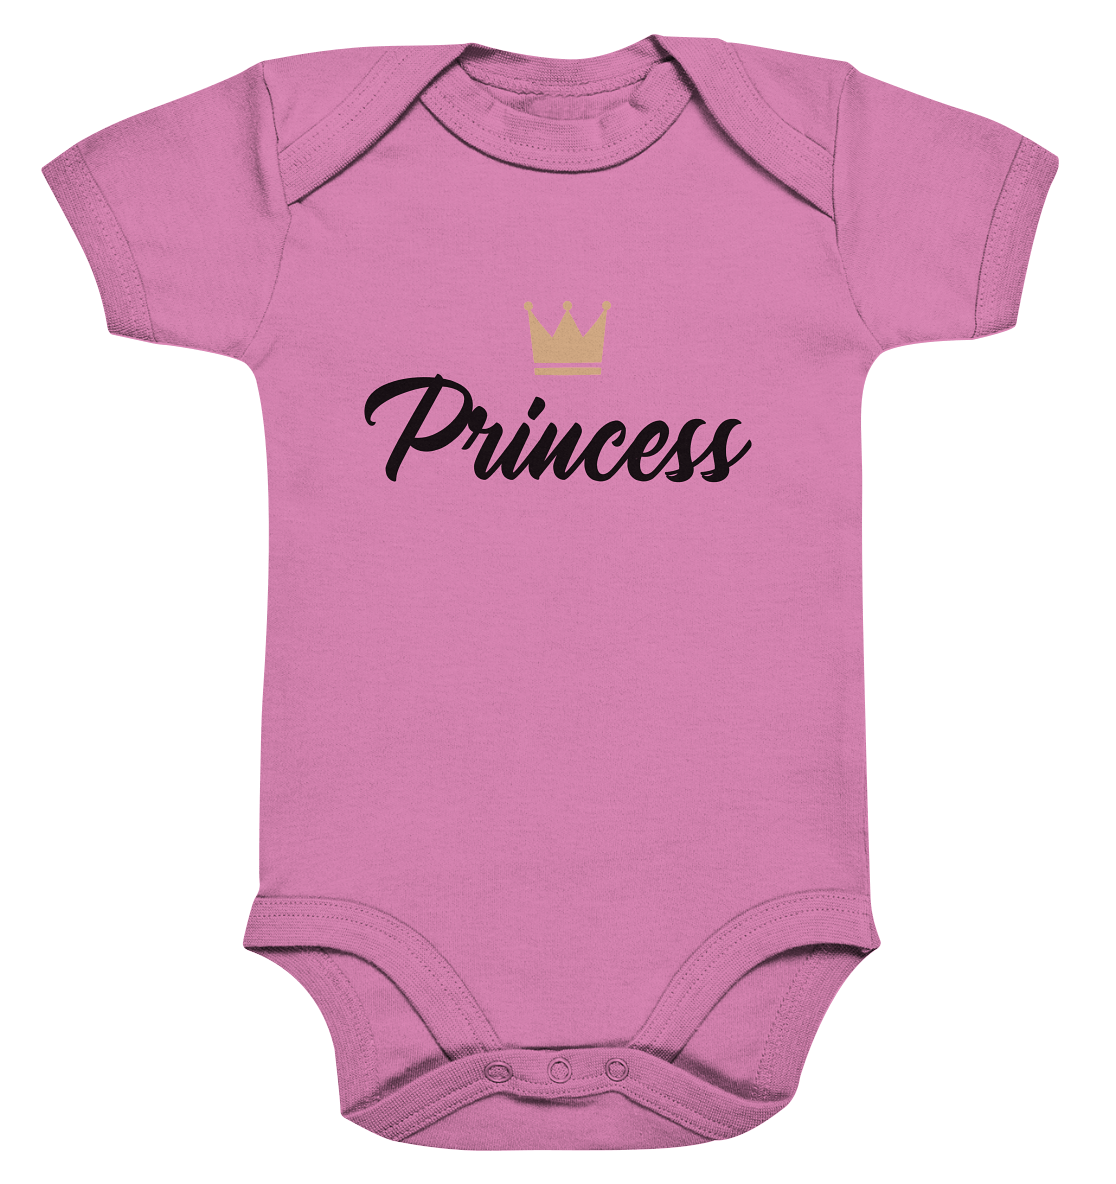 Princess Baby Bodysuite Familienoutfit King, Queen und Princess Bloominic in pink